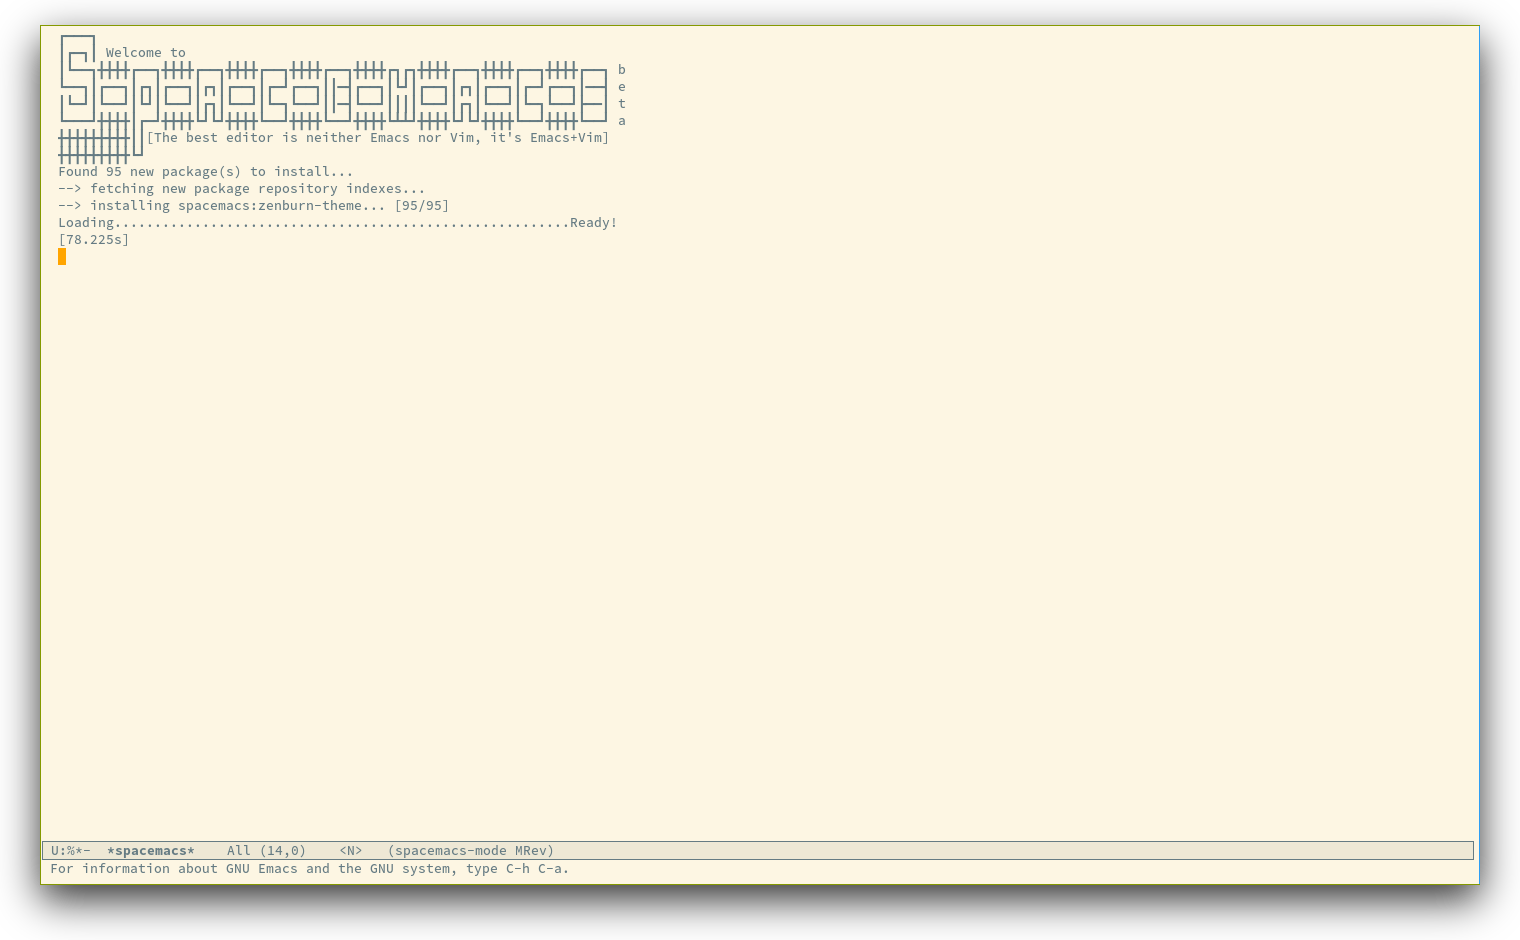 /TakeV/spacemacs/media/commit/61c97b7dda59edee607ce01df927bea5650843e4/doc/img/spacemacs-startup.png